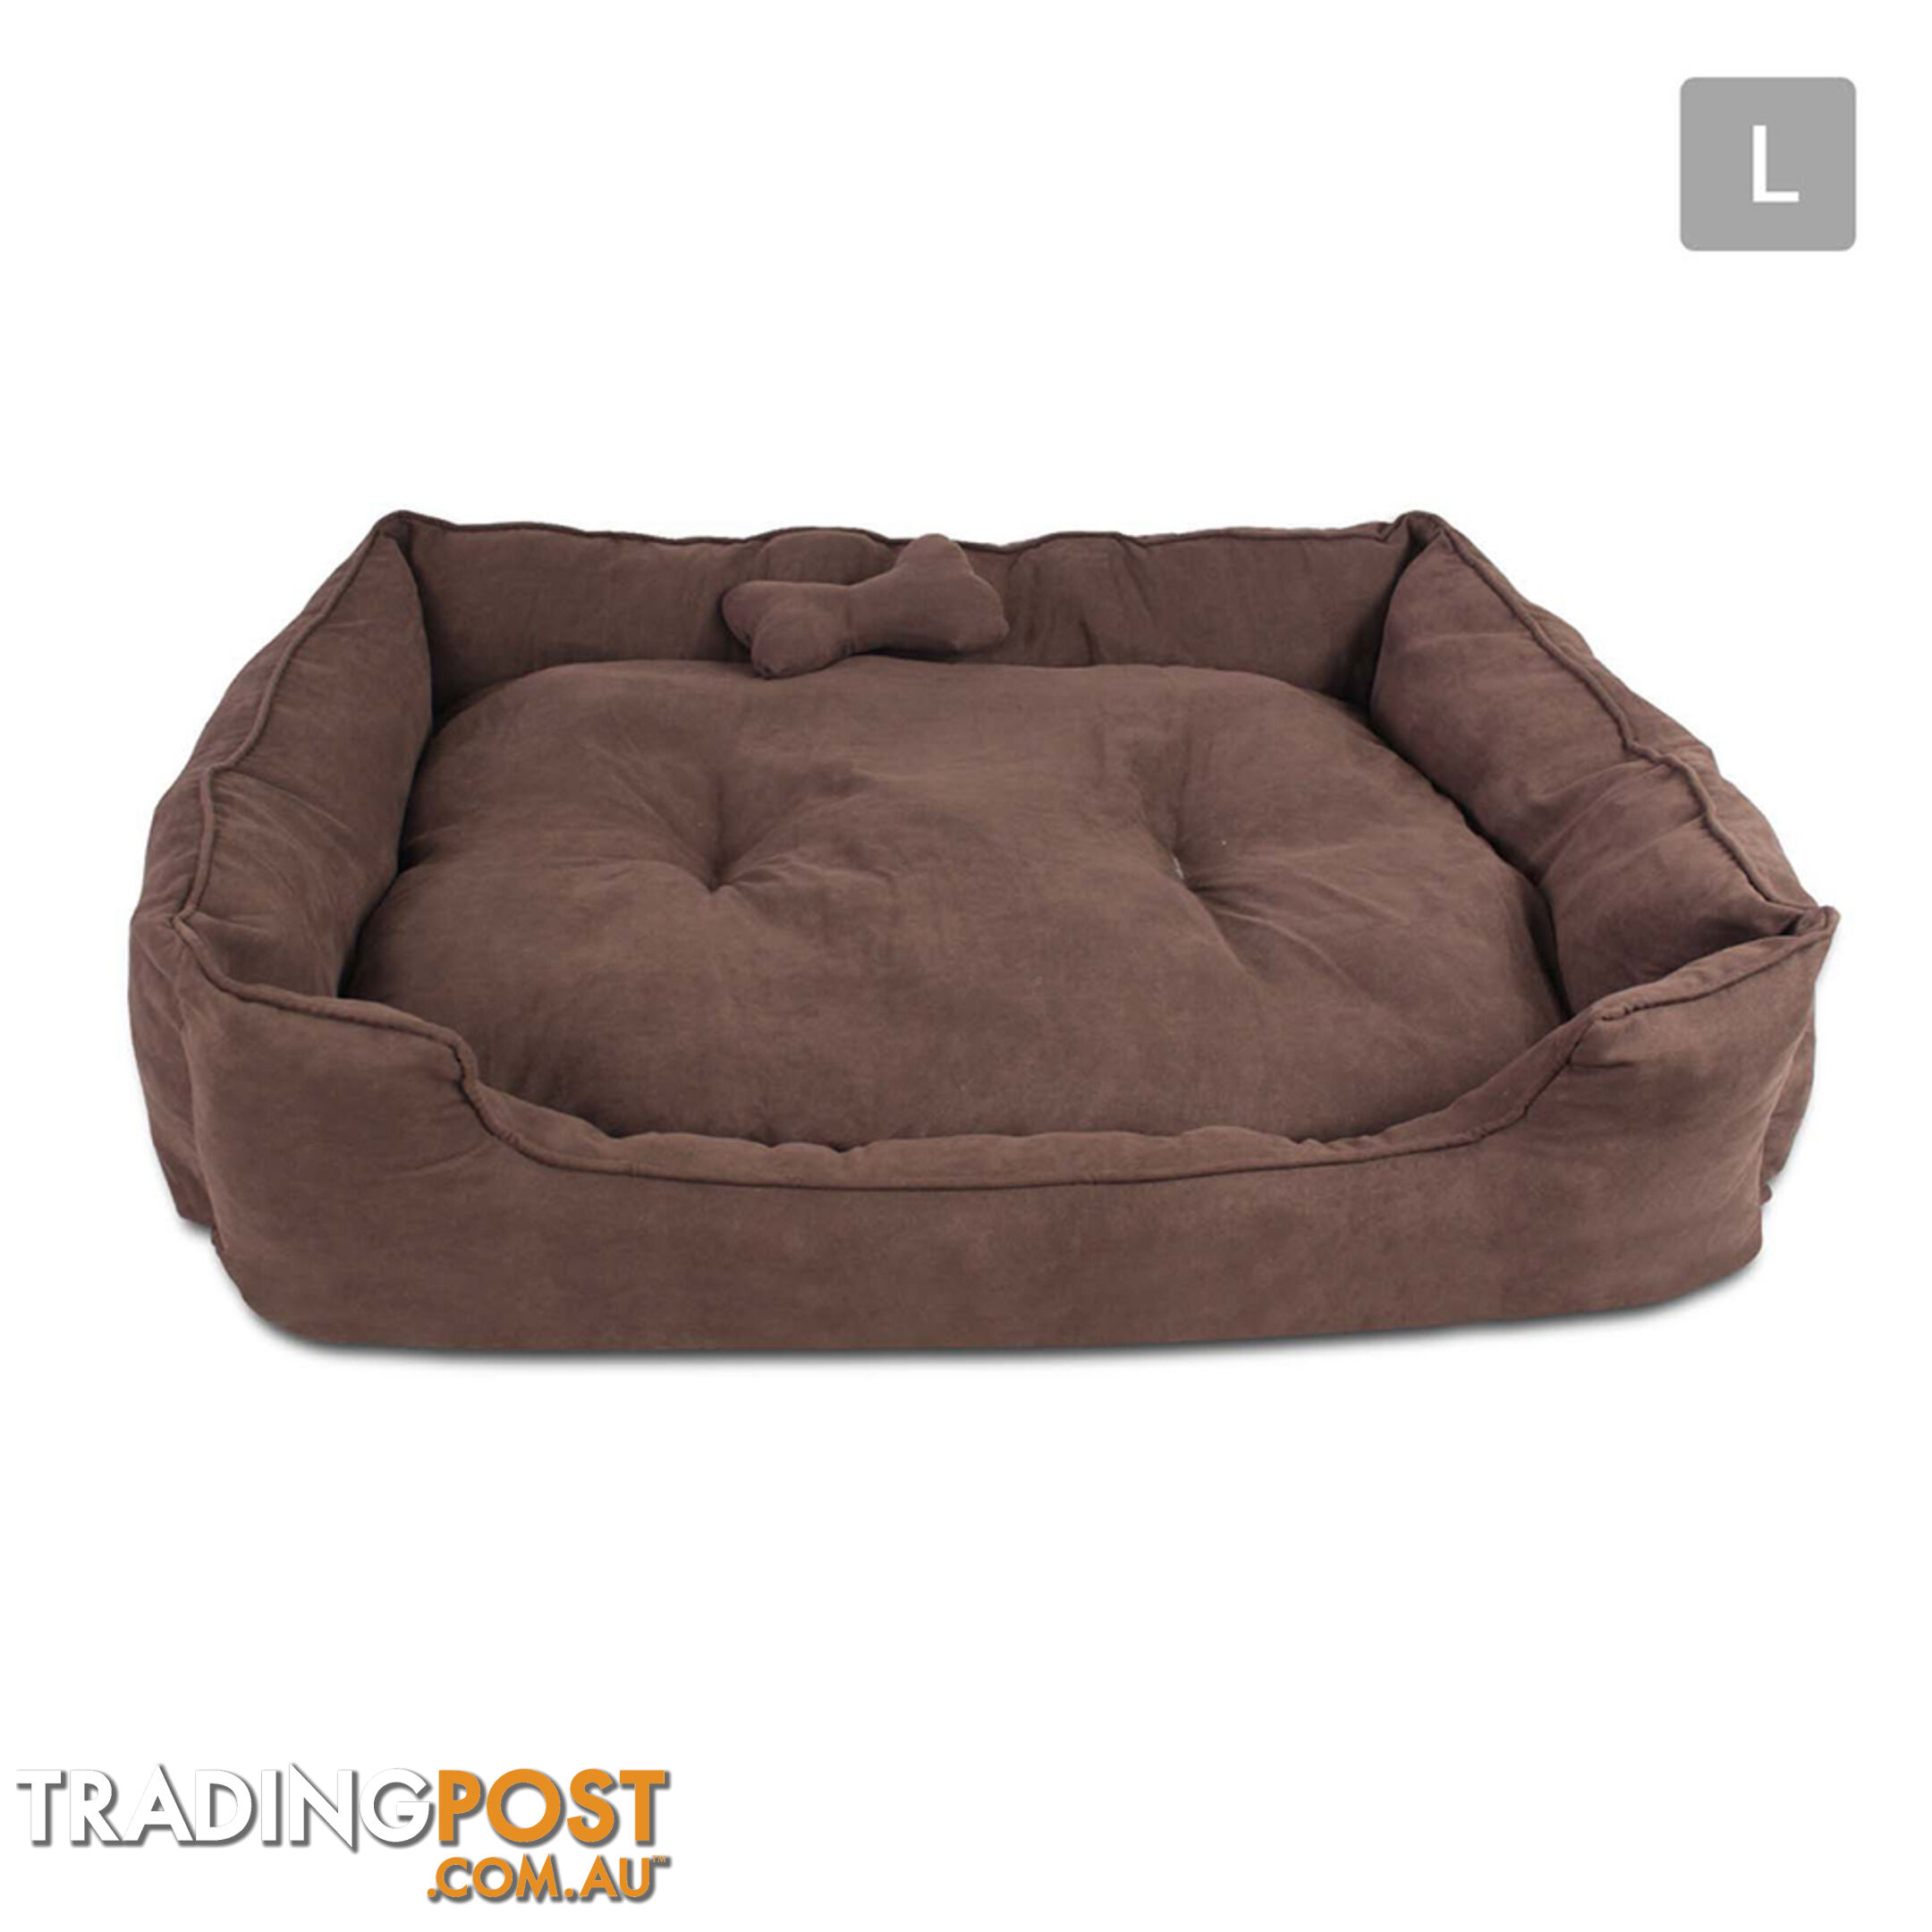 Deluxe Faux Suede Dog Bed Pet Cat Puppy Washable Soft Cushion Mat Basket Large